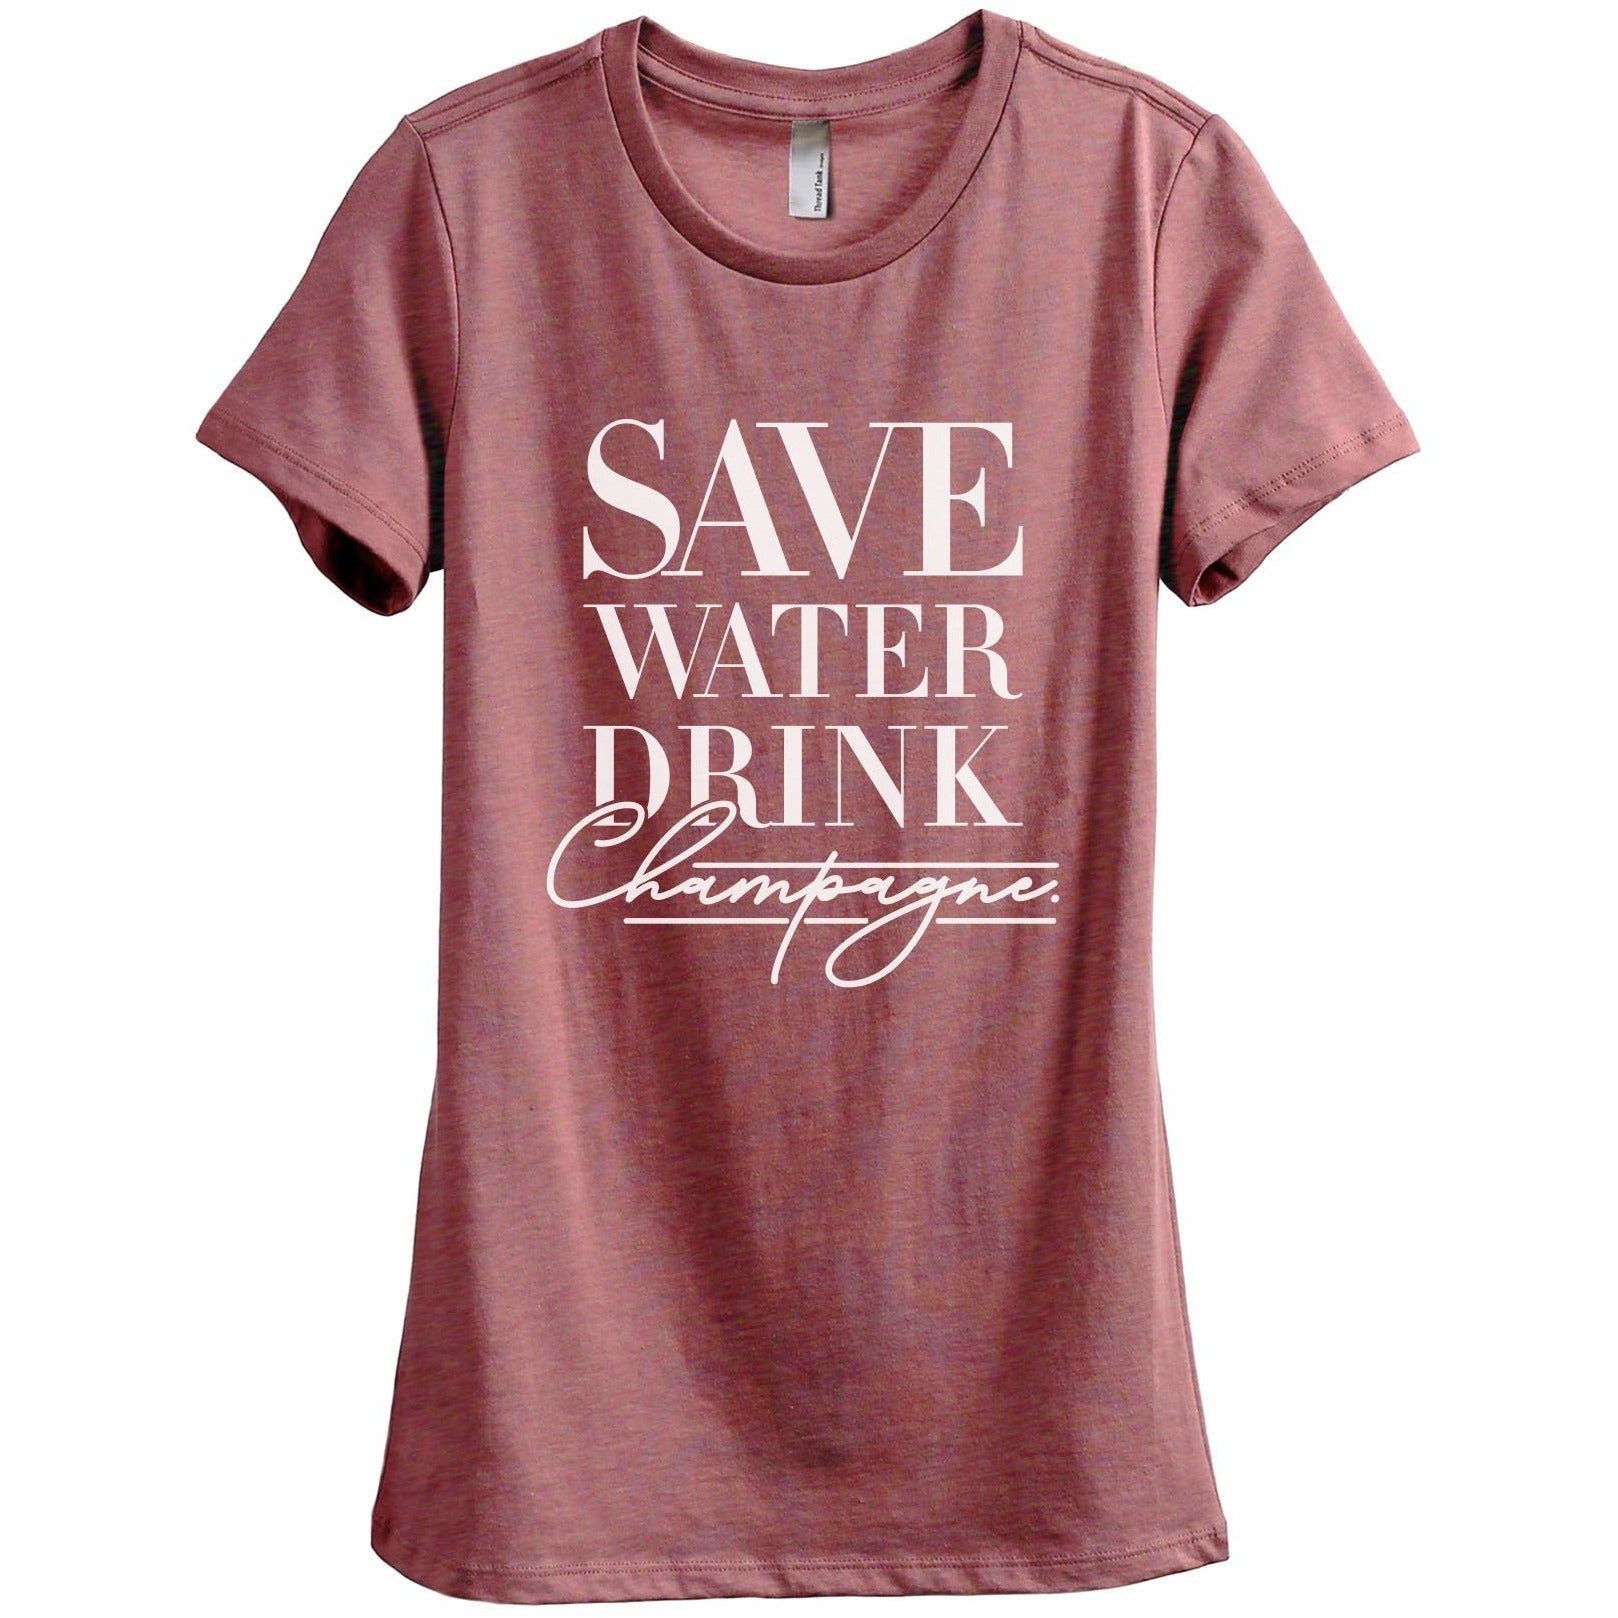 Save Water Drink Champagne - thread tank | Stories you can wear.